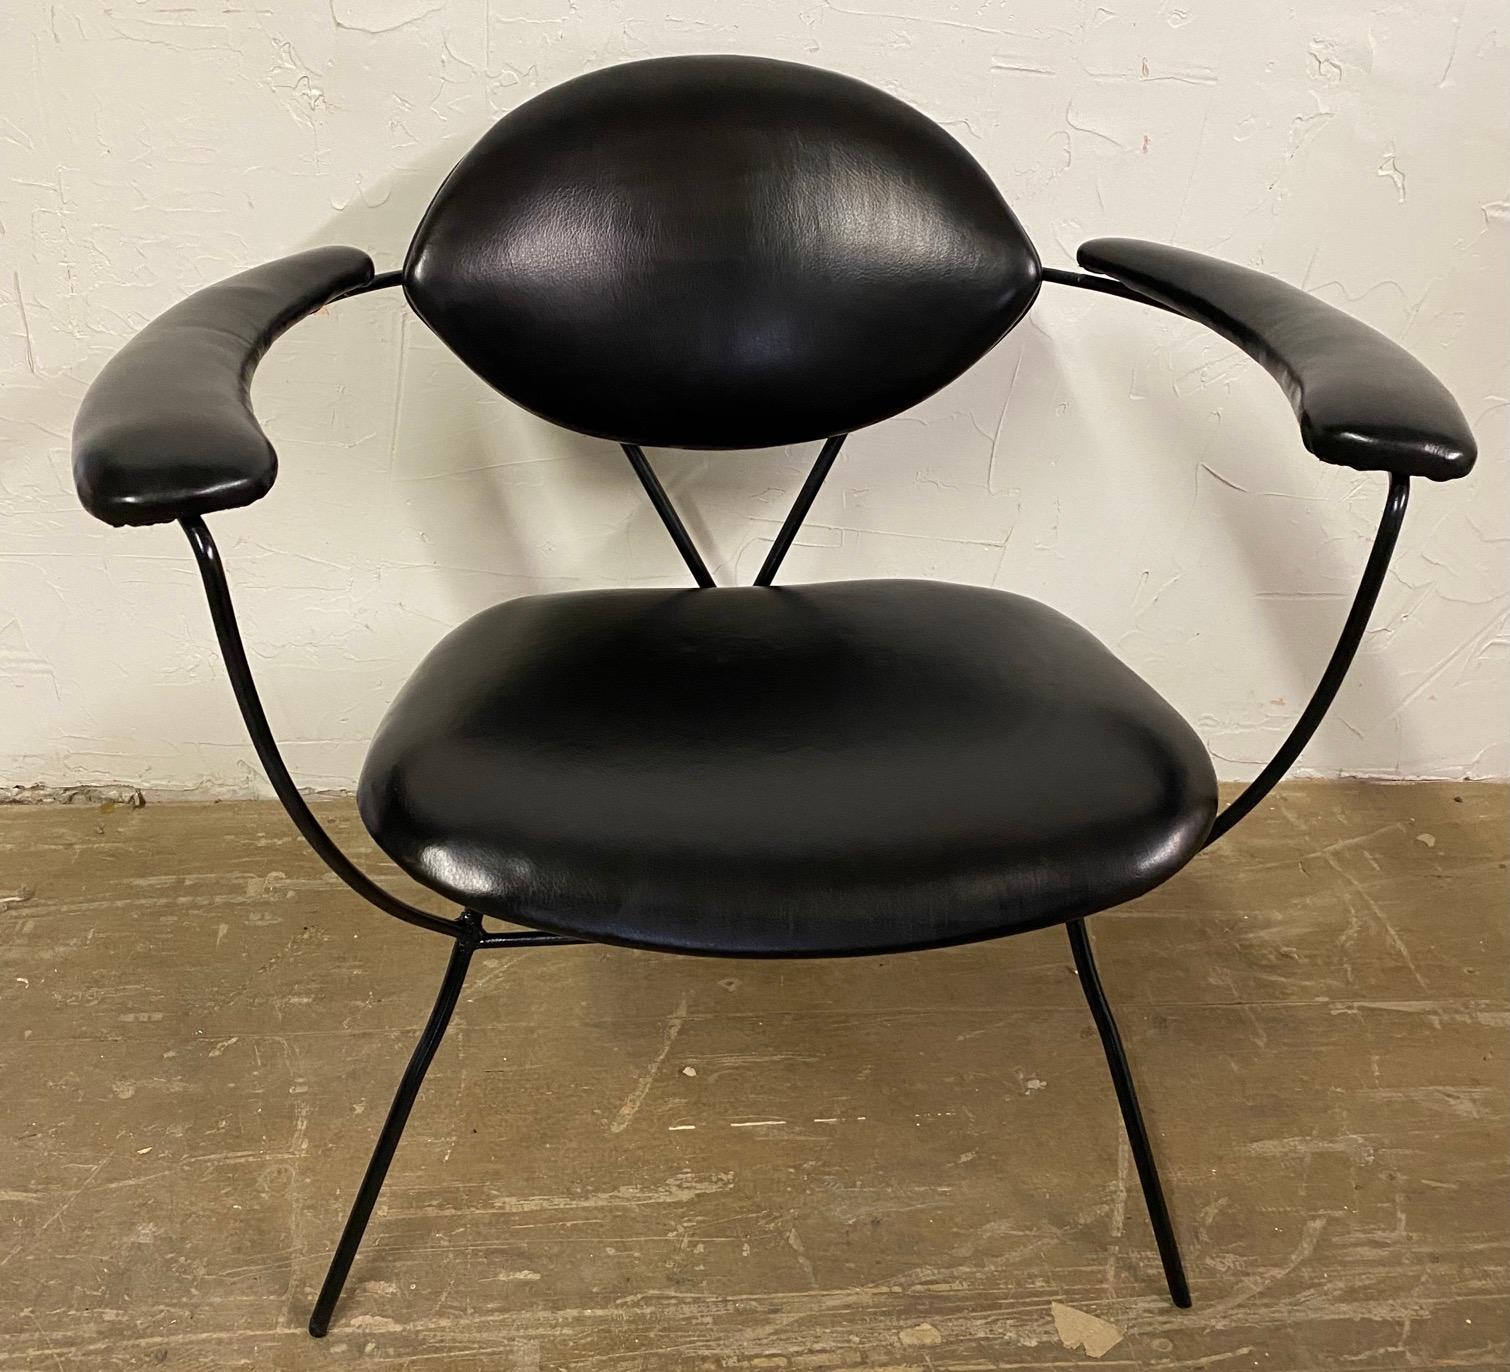 A fine Mid-Century Modern armchair, elegant and compact, standing on fine black iron spider legs. This stylish chair gives great comfort and support. This chair has recently been professionally restored. Great office chair, side chair or occasional